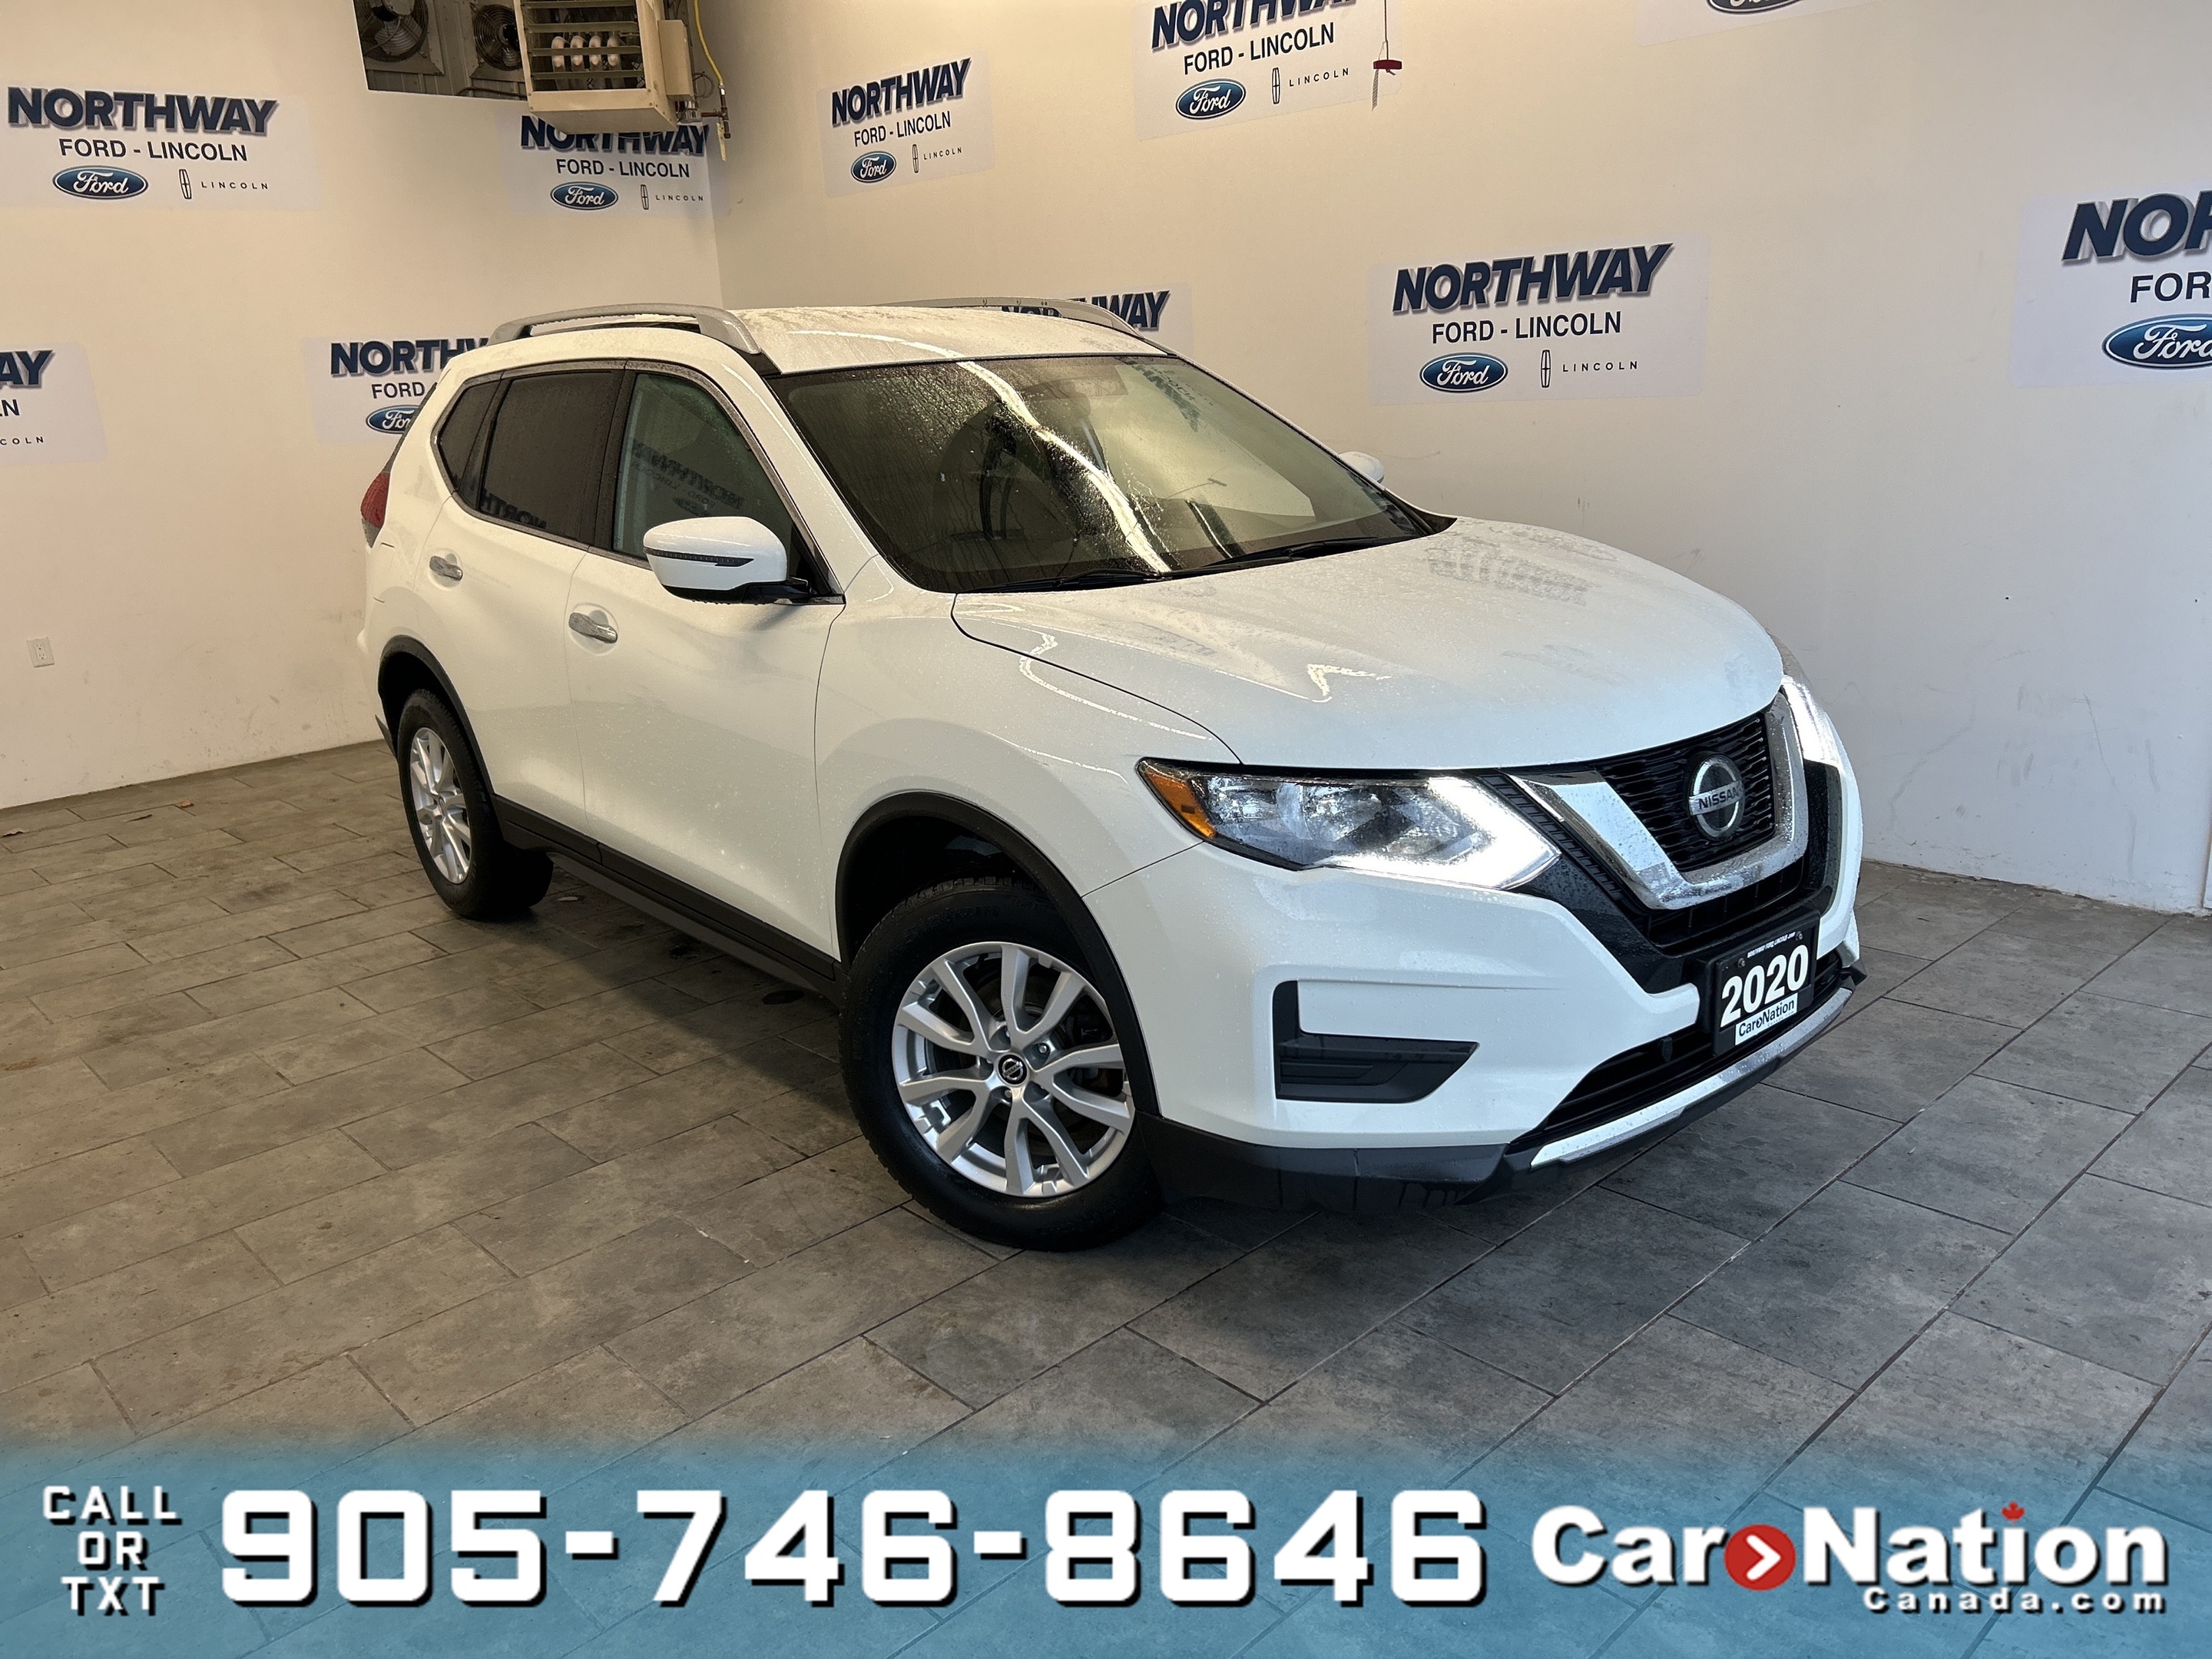 2020 Nissan Rogue SPECIAL EDITION | AWD | TOUCHSCREEN | REAR CAM